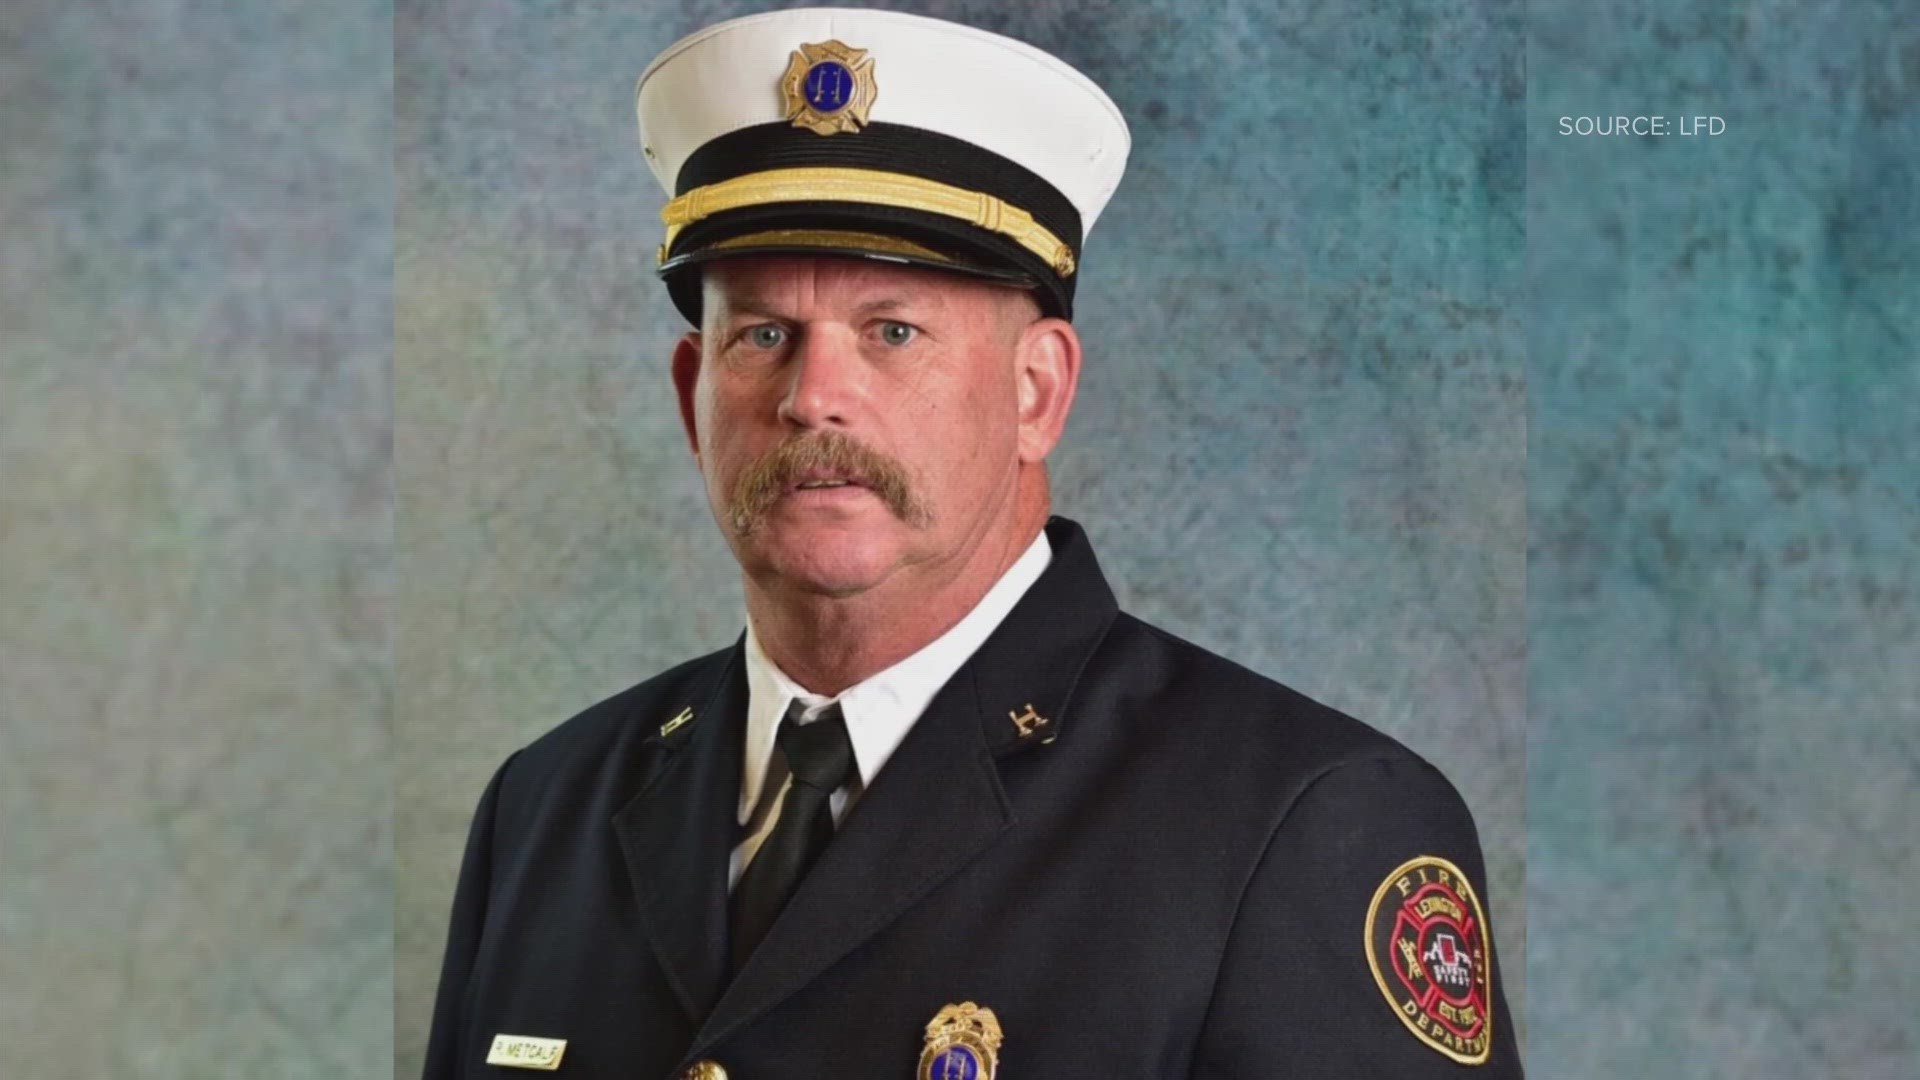 Capt. Ronnie Metcalf served the city for almost 20 years.